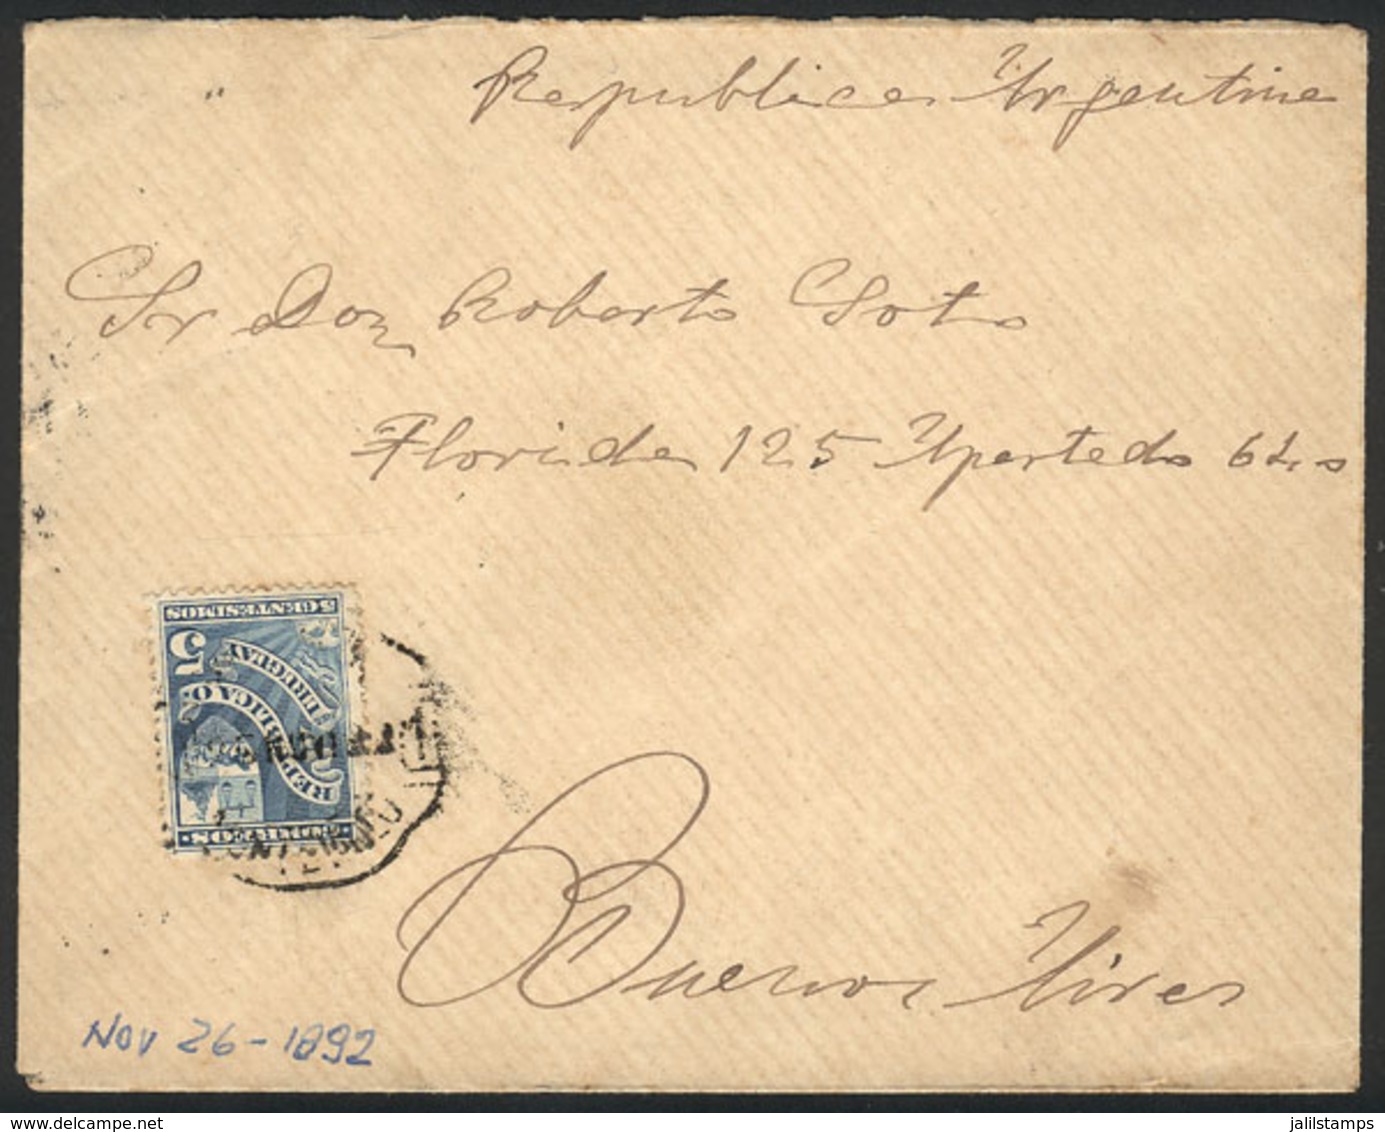 URUGUAY: Cover Franked With 5. And Sent From Montevideo To Buenos Aires On 25/NO/1892, VF Quality! - Uruguay